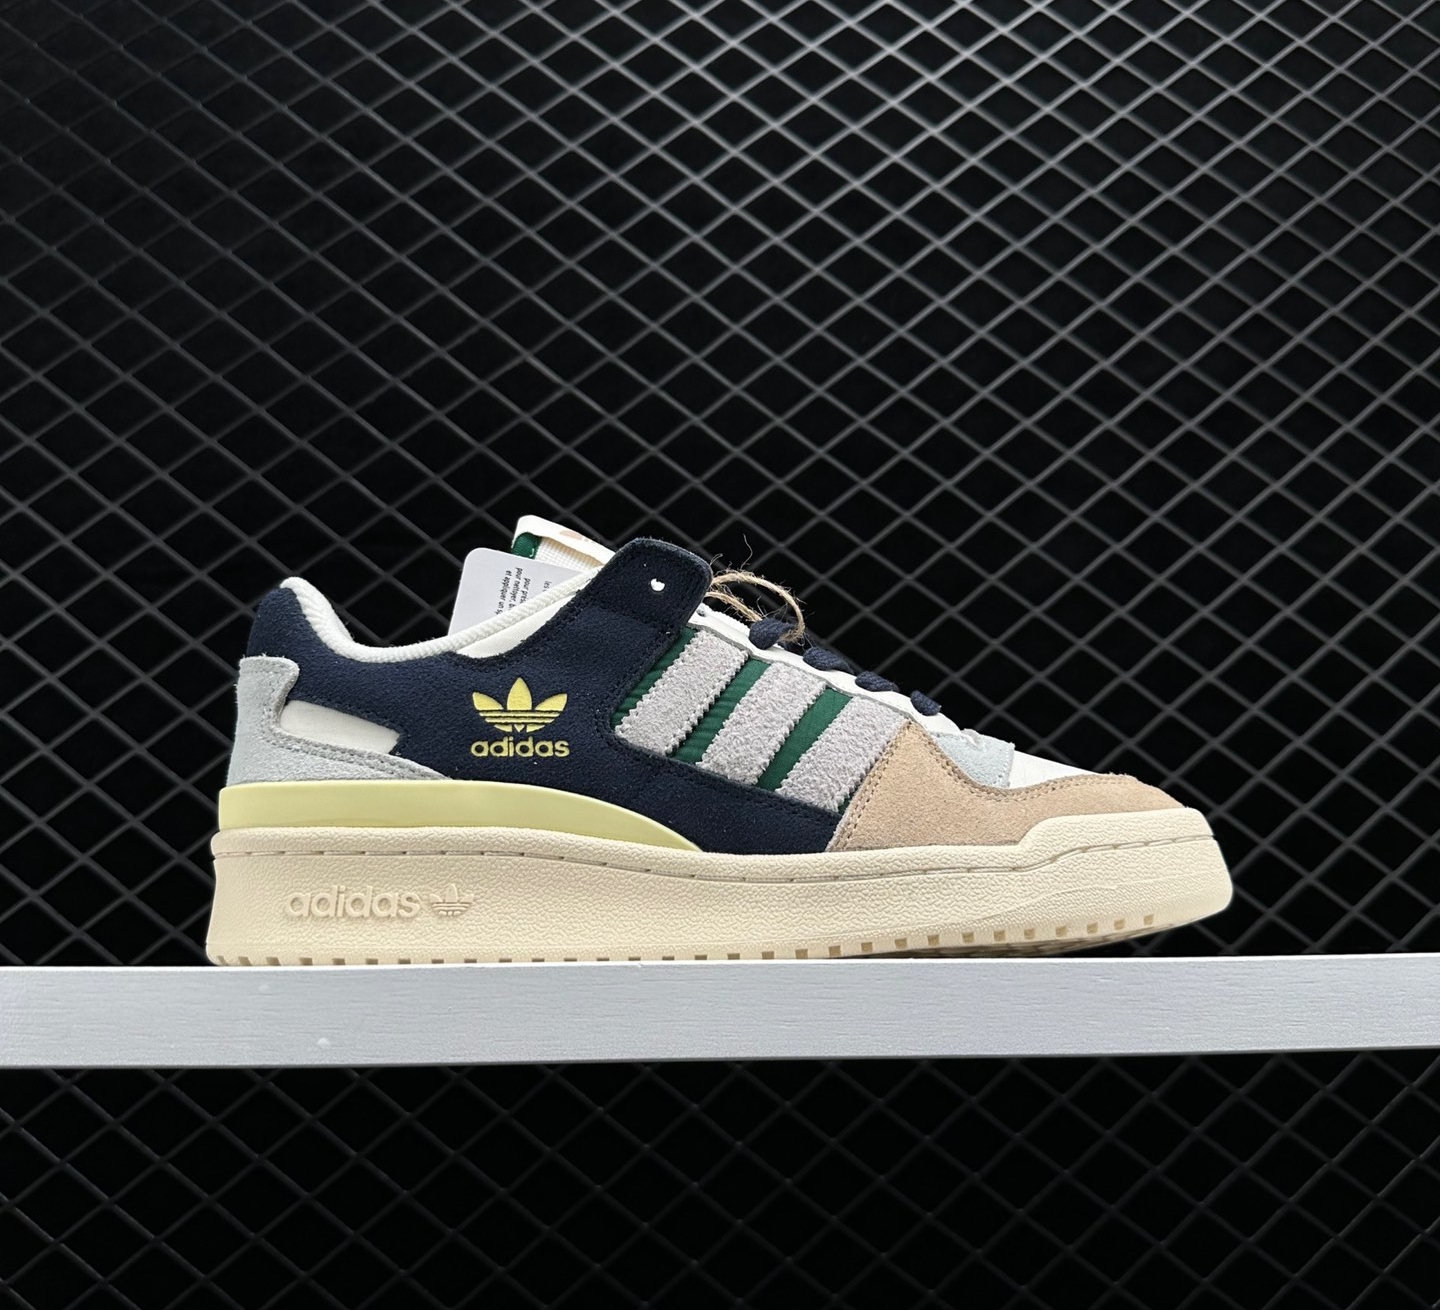 Adidas Forum 84 Low 'Beige Navy Green' GW4332 - Stylish and Comfortable Sneakers